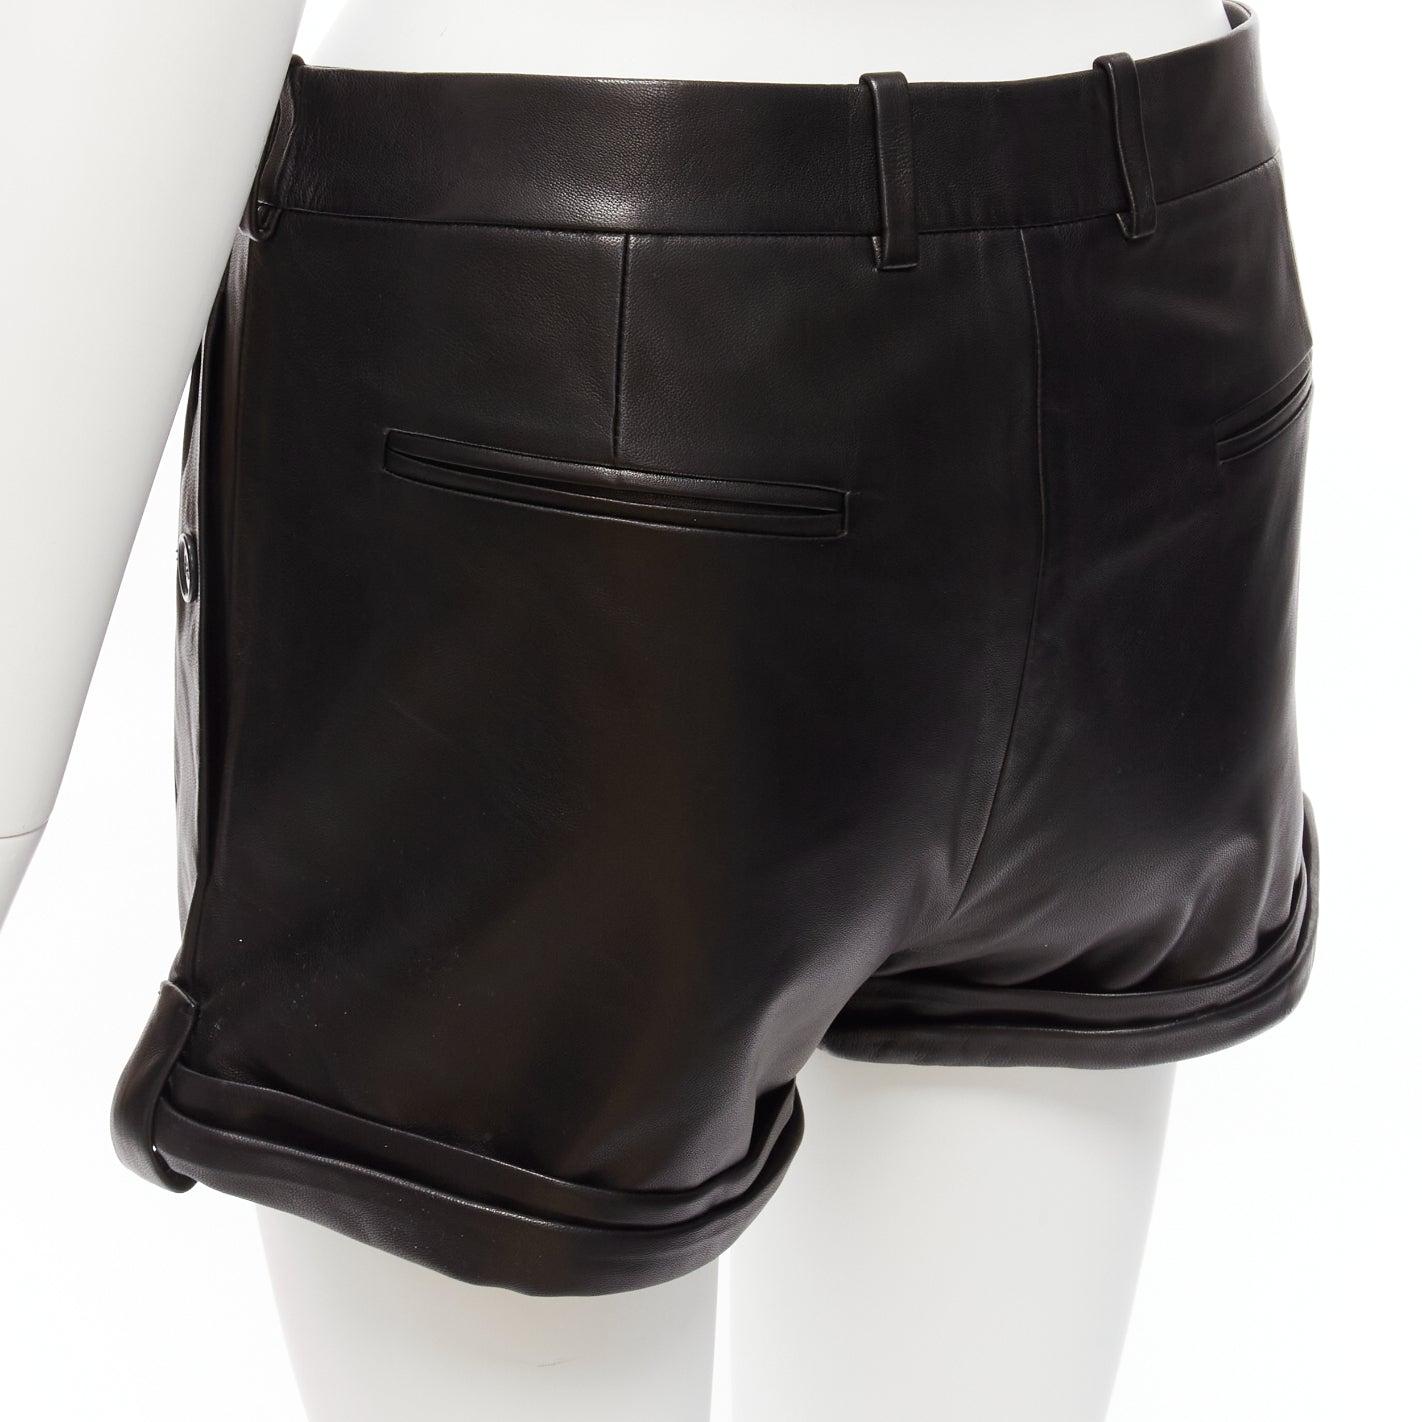 SAINT LAURENT 2017 black lambskin leather high waisted cuffed shorts FR36 S For Sale 3